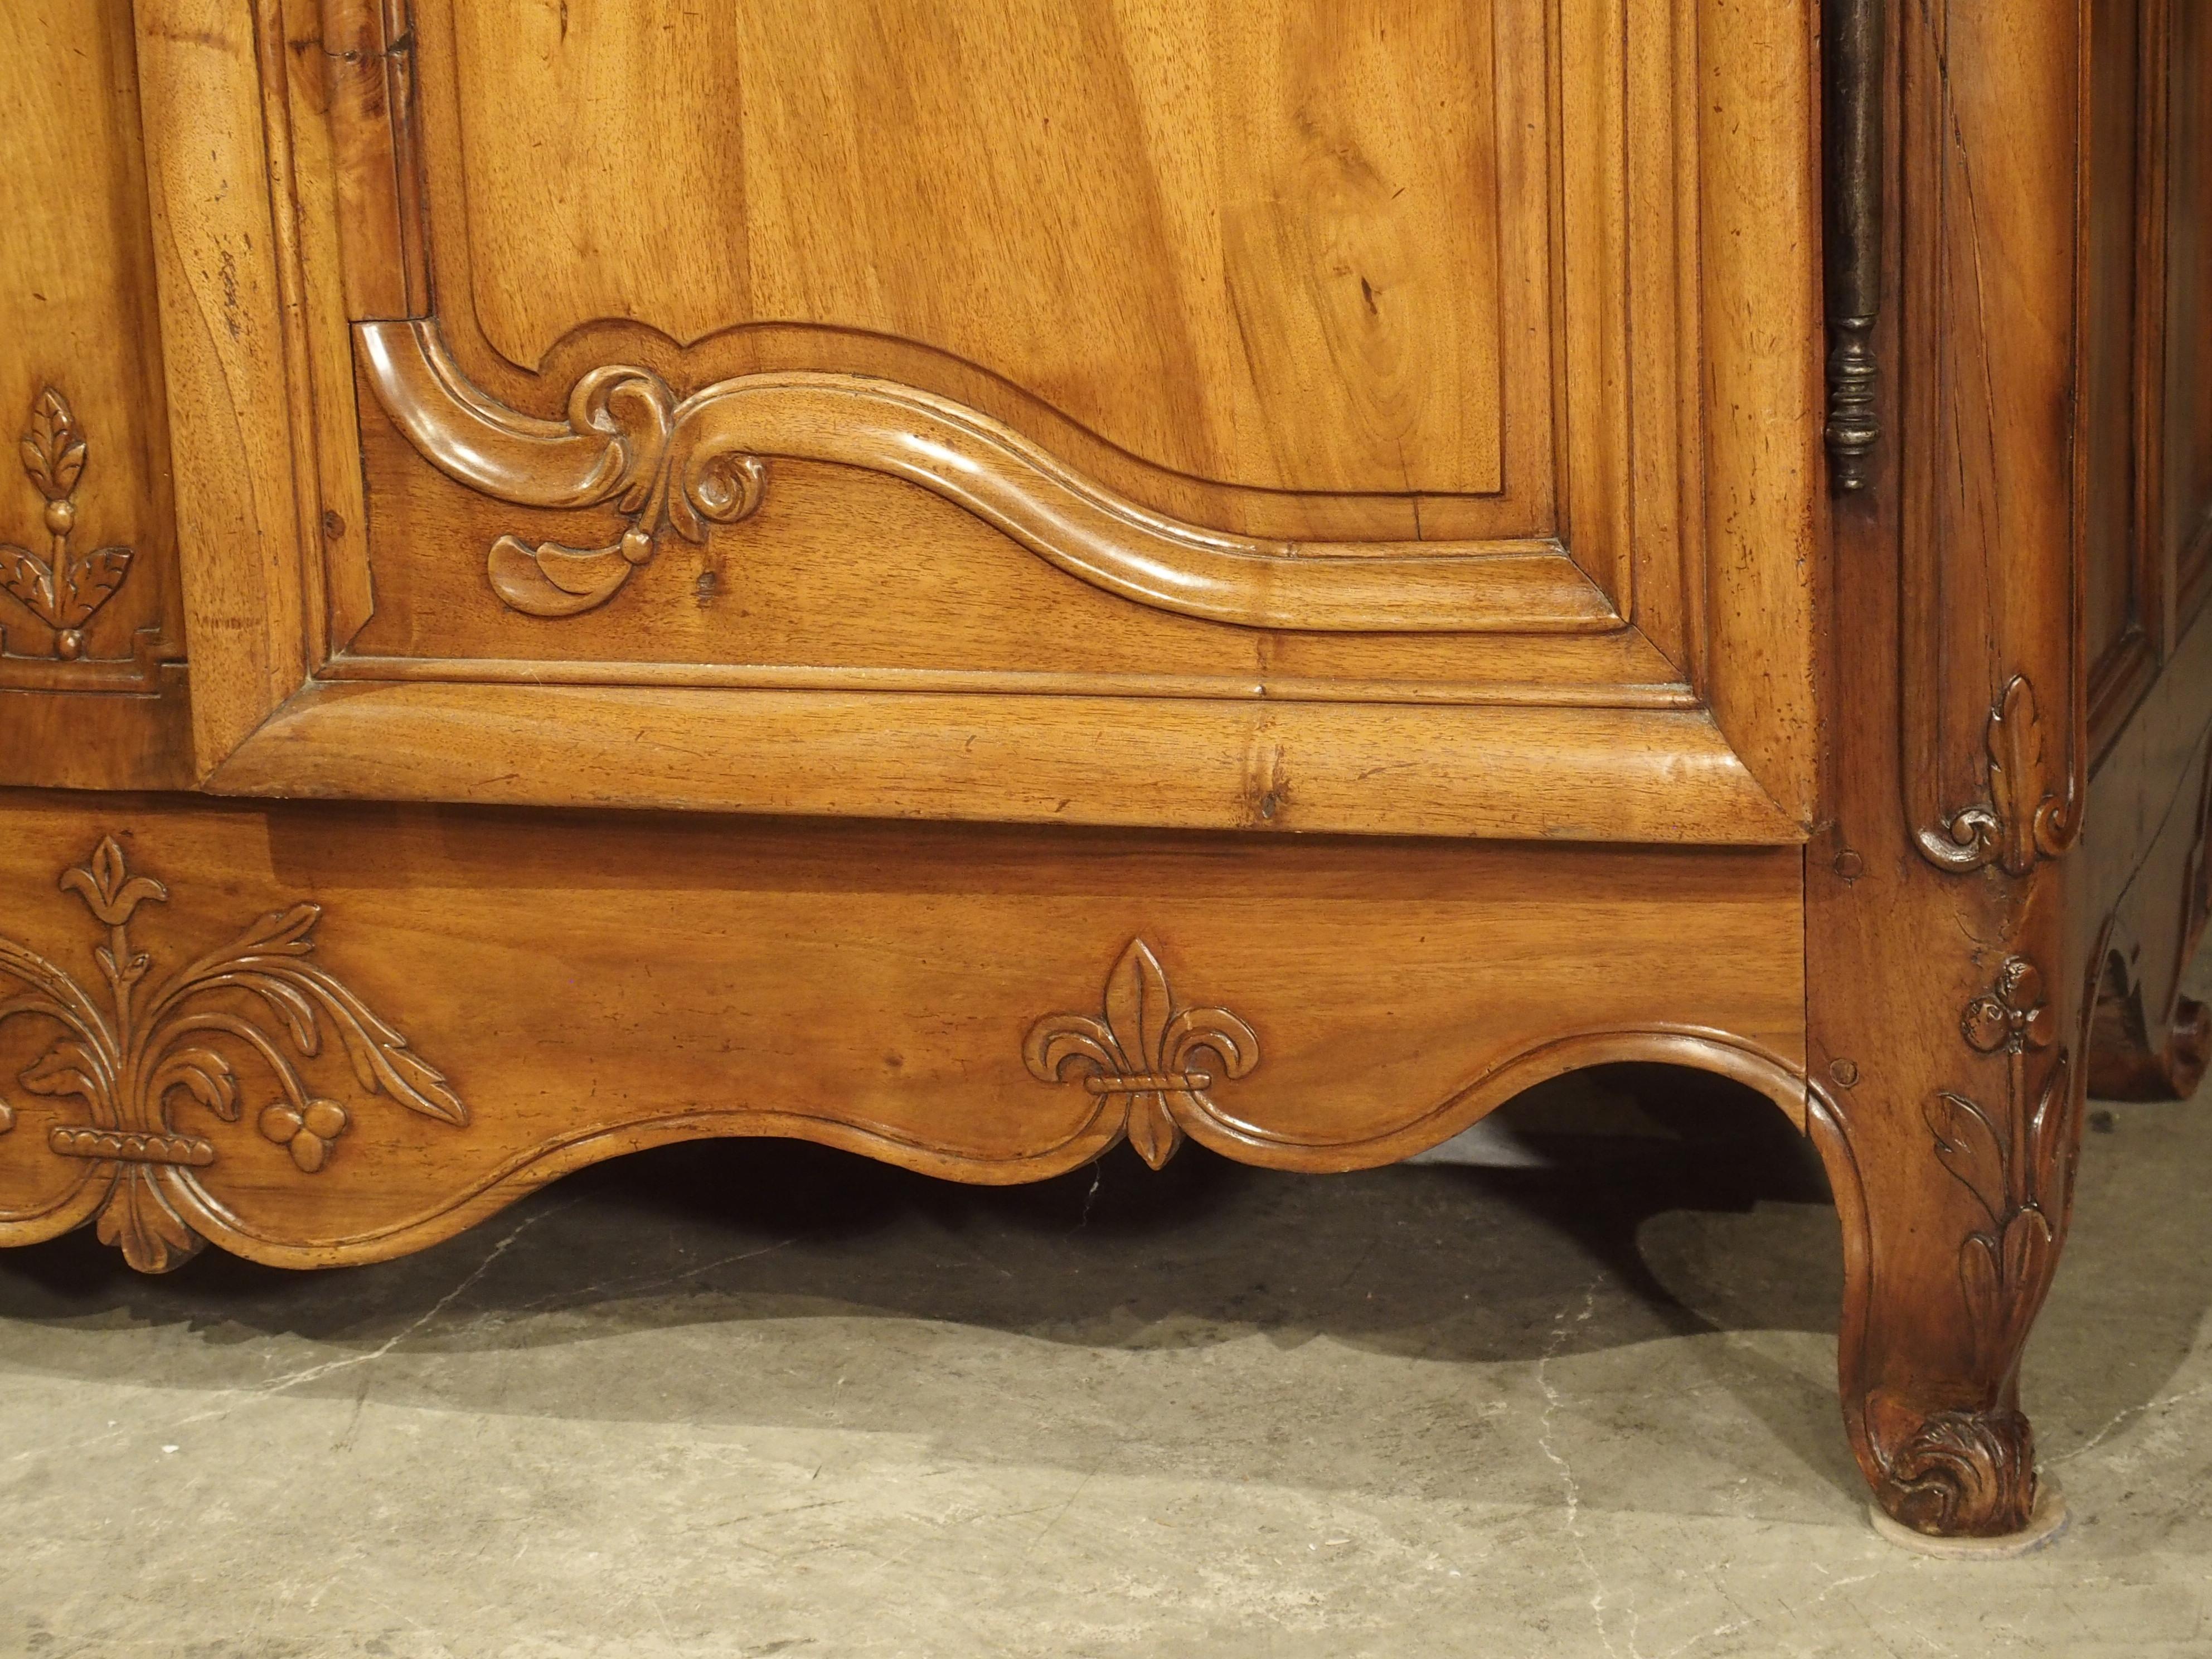 French 18th Century Walnut Wood Armoire from the Rhone Valley